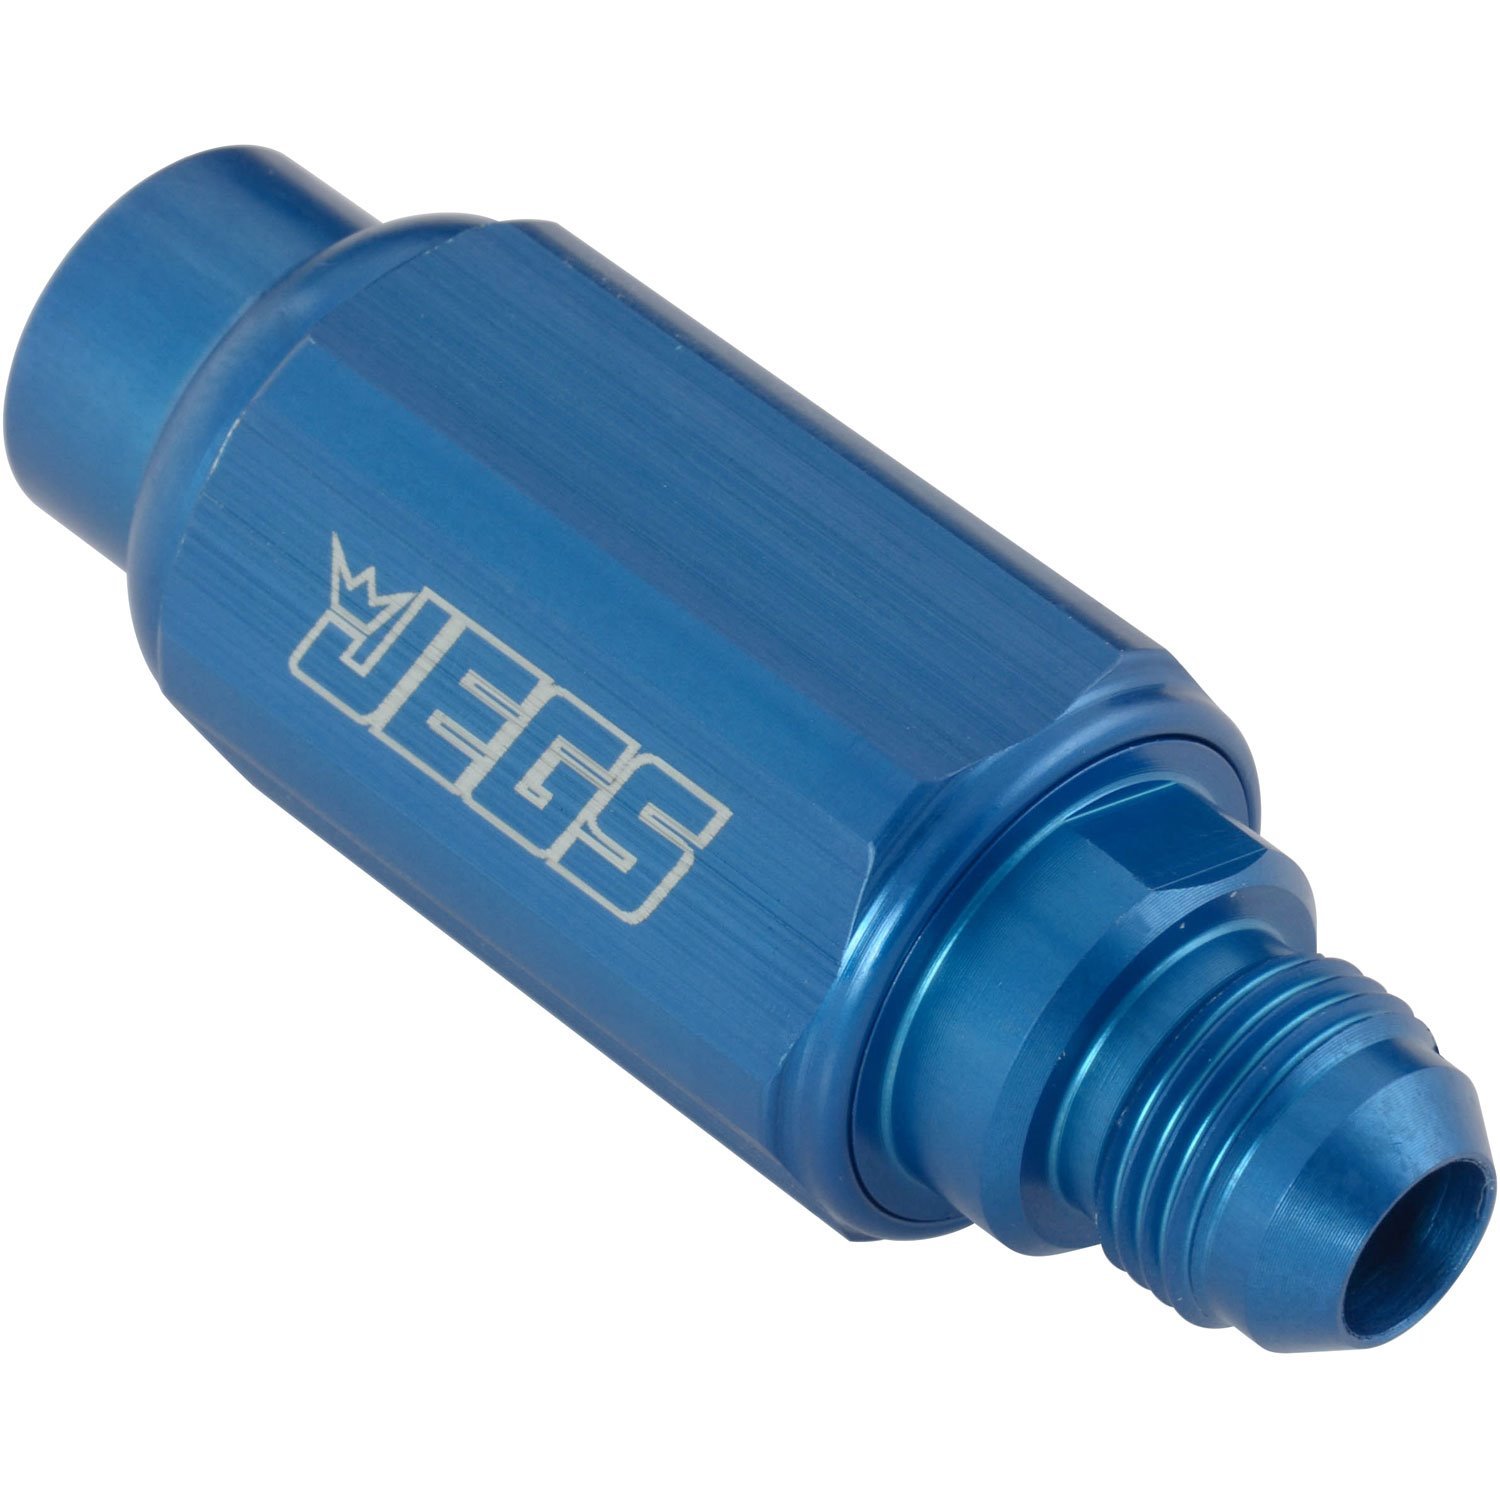 Compact Billet Aluminum In-Line Fuel Filter, 2 5/16 in. Long [-8 AN Male/Female, Blue]